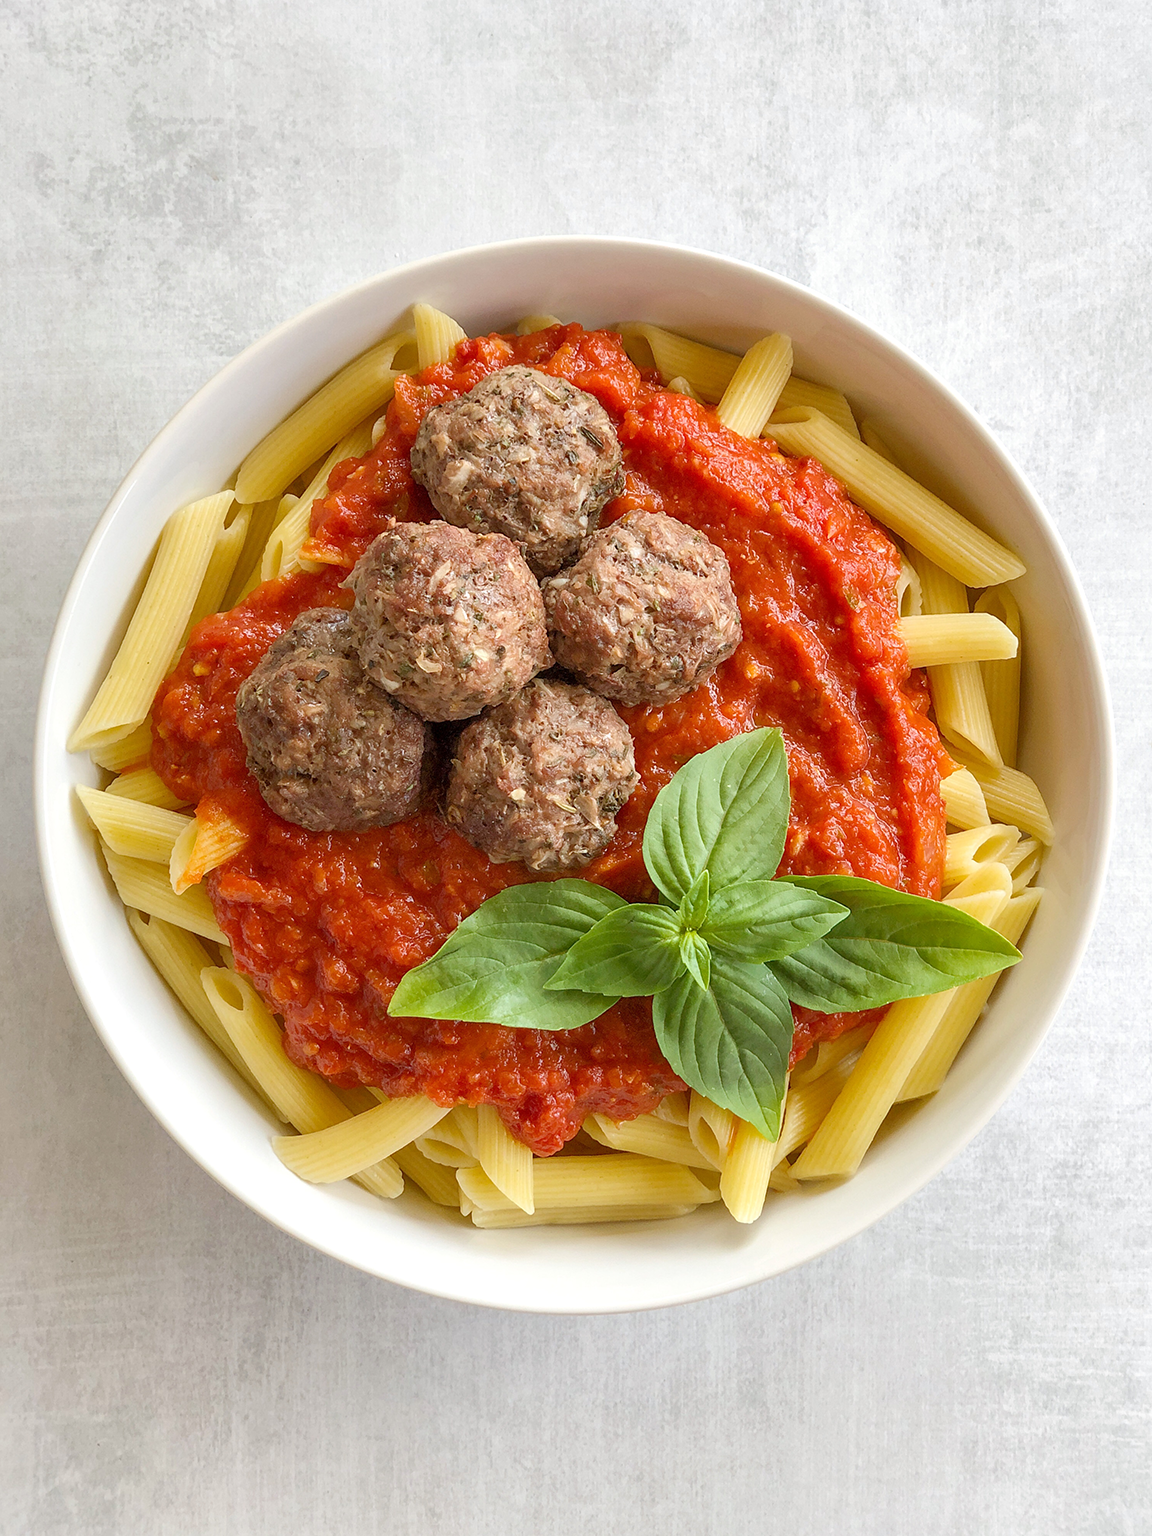 Dairy Free and Egg Free Meatballs